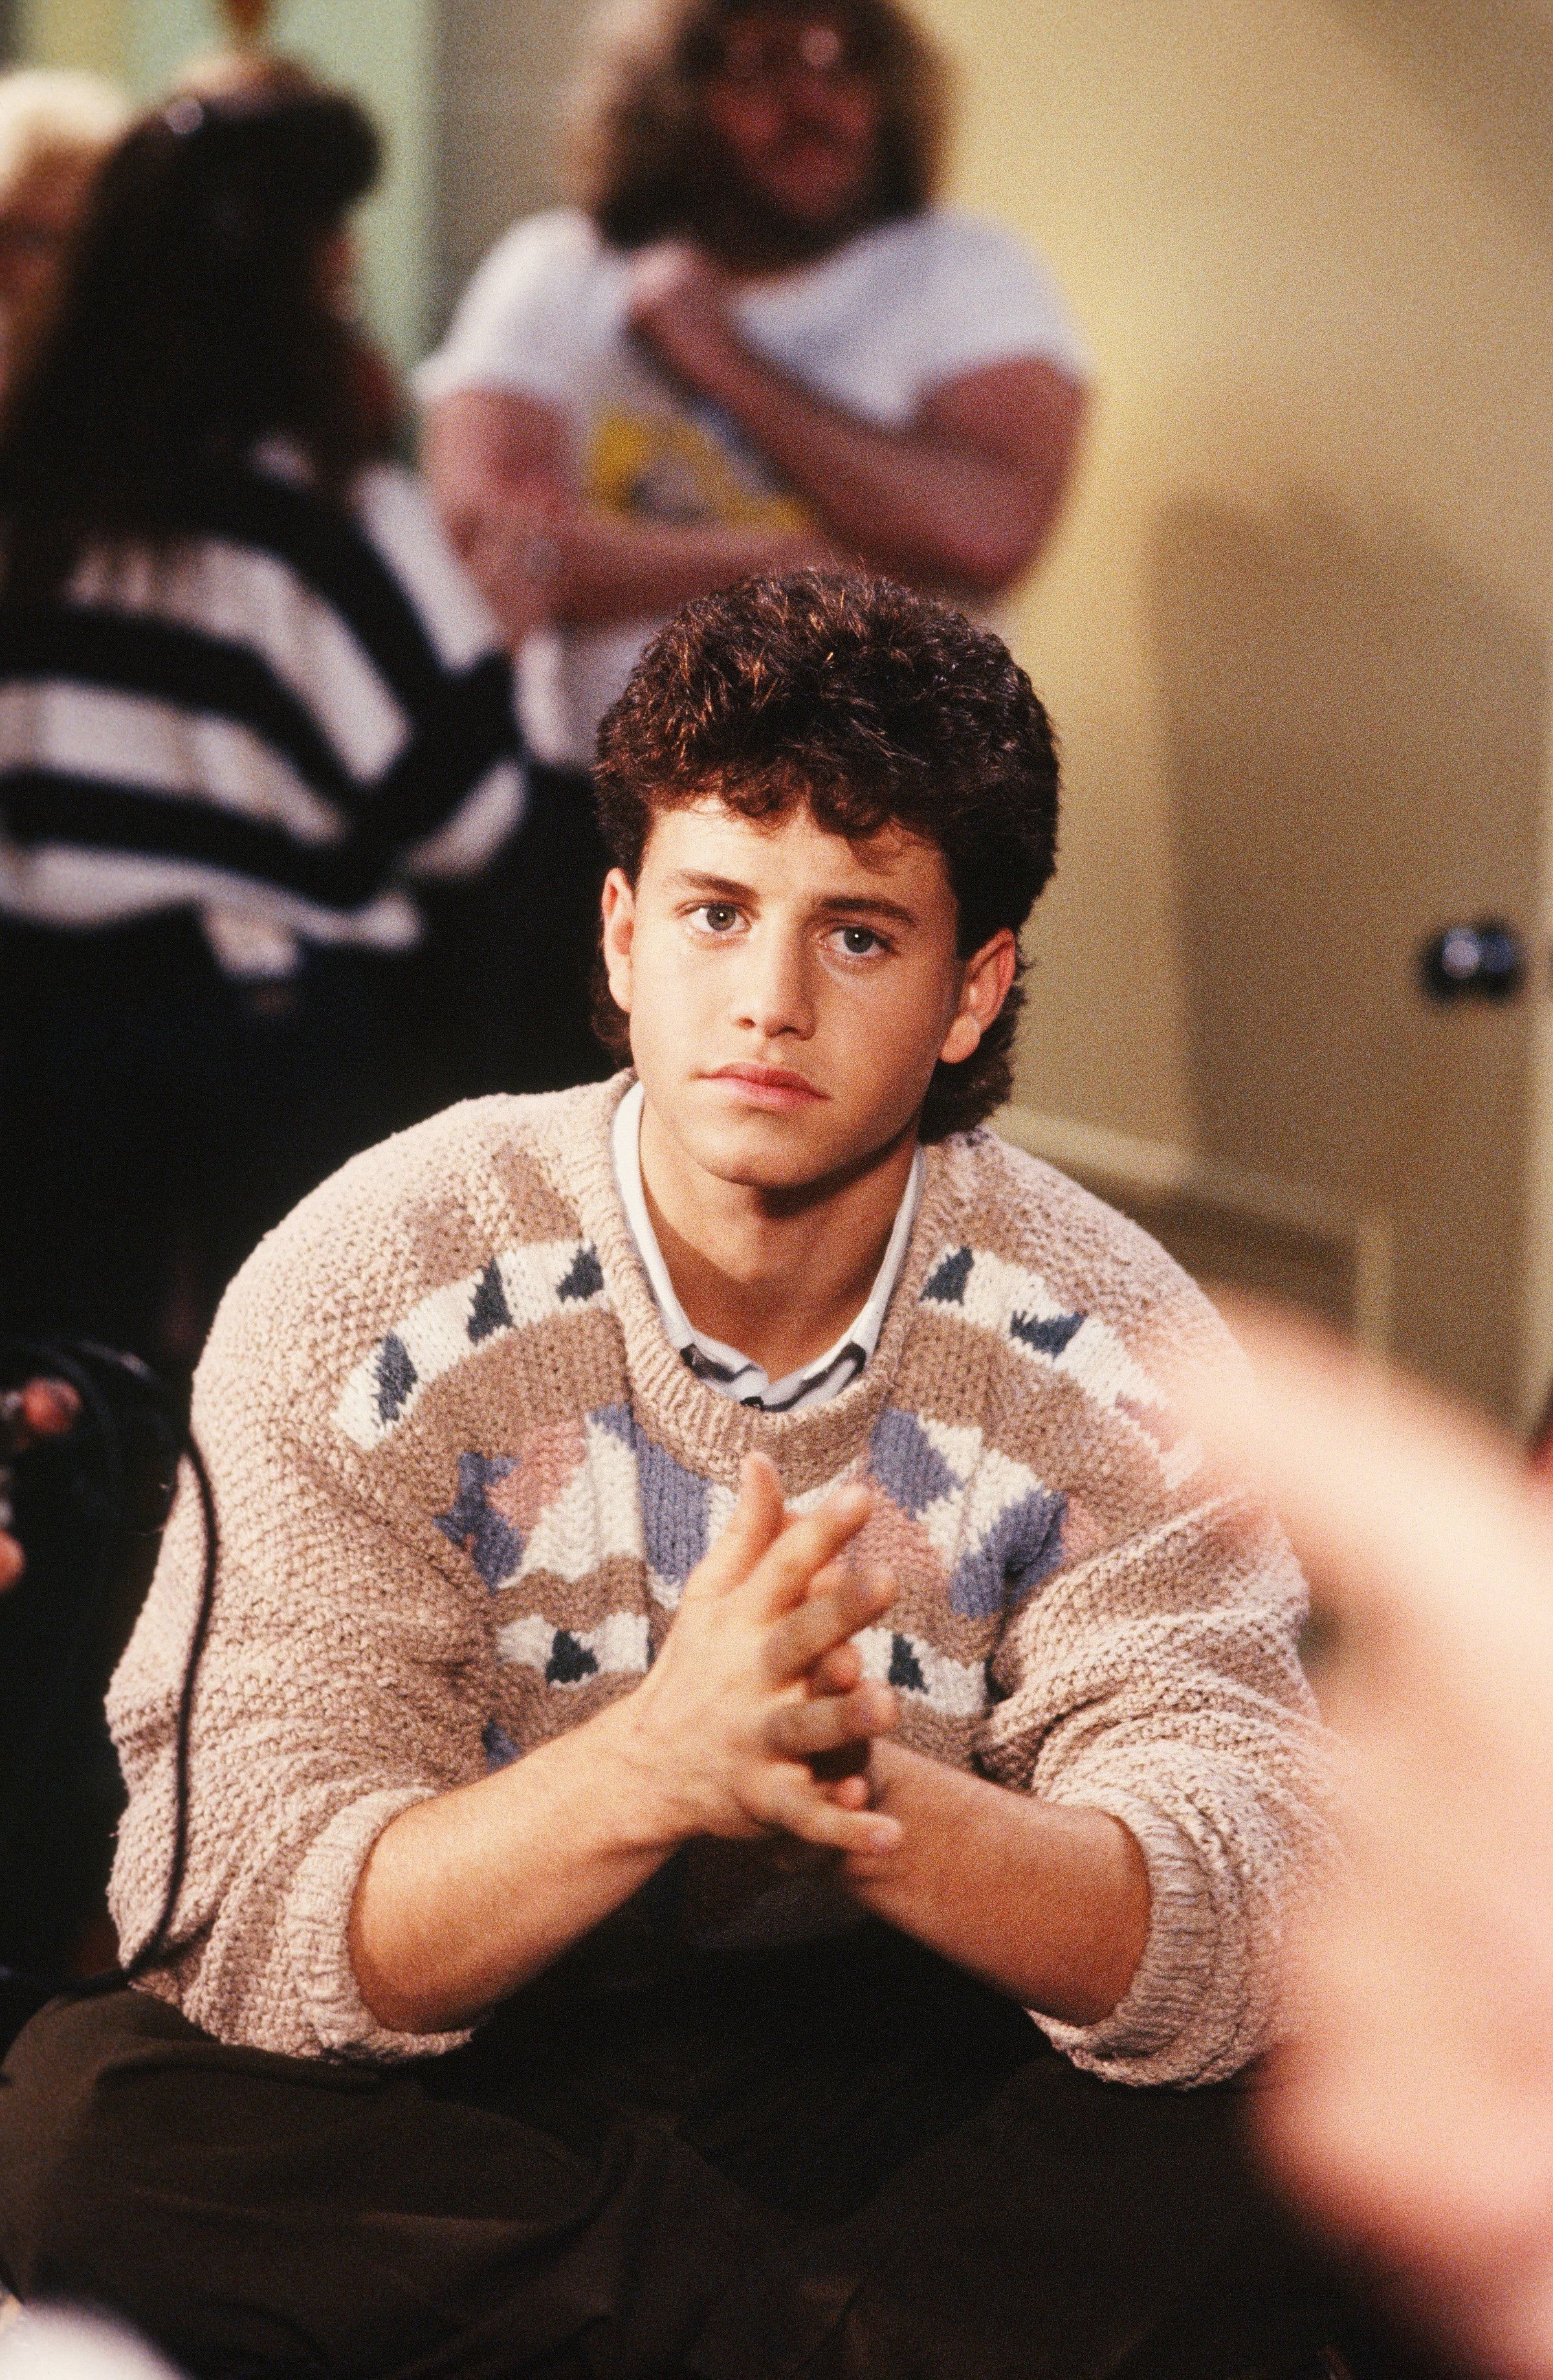 Kirk Cameron during the filming of a 1988 Los Angeles, California, made-for-TV movie | Photo: George Rose/Getty Images